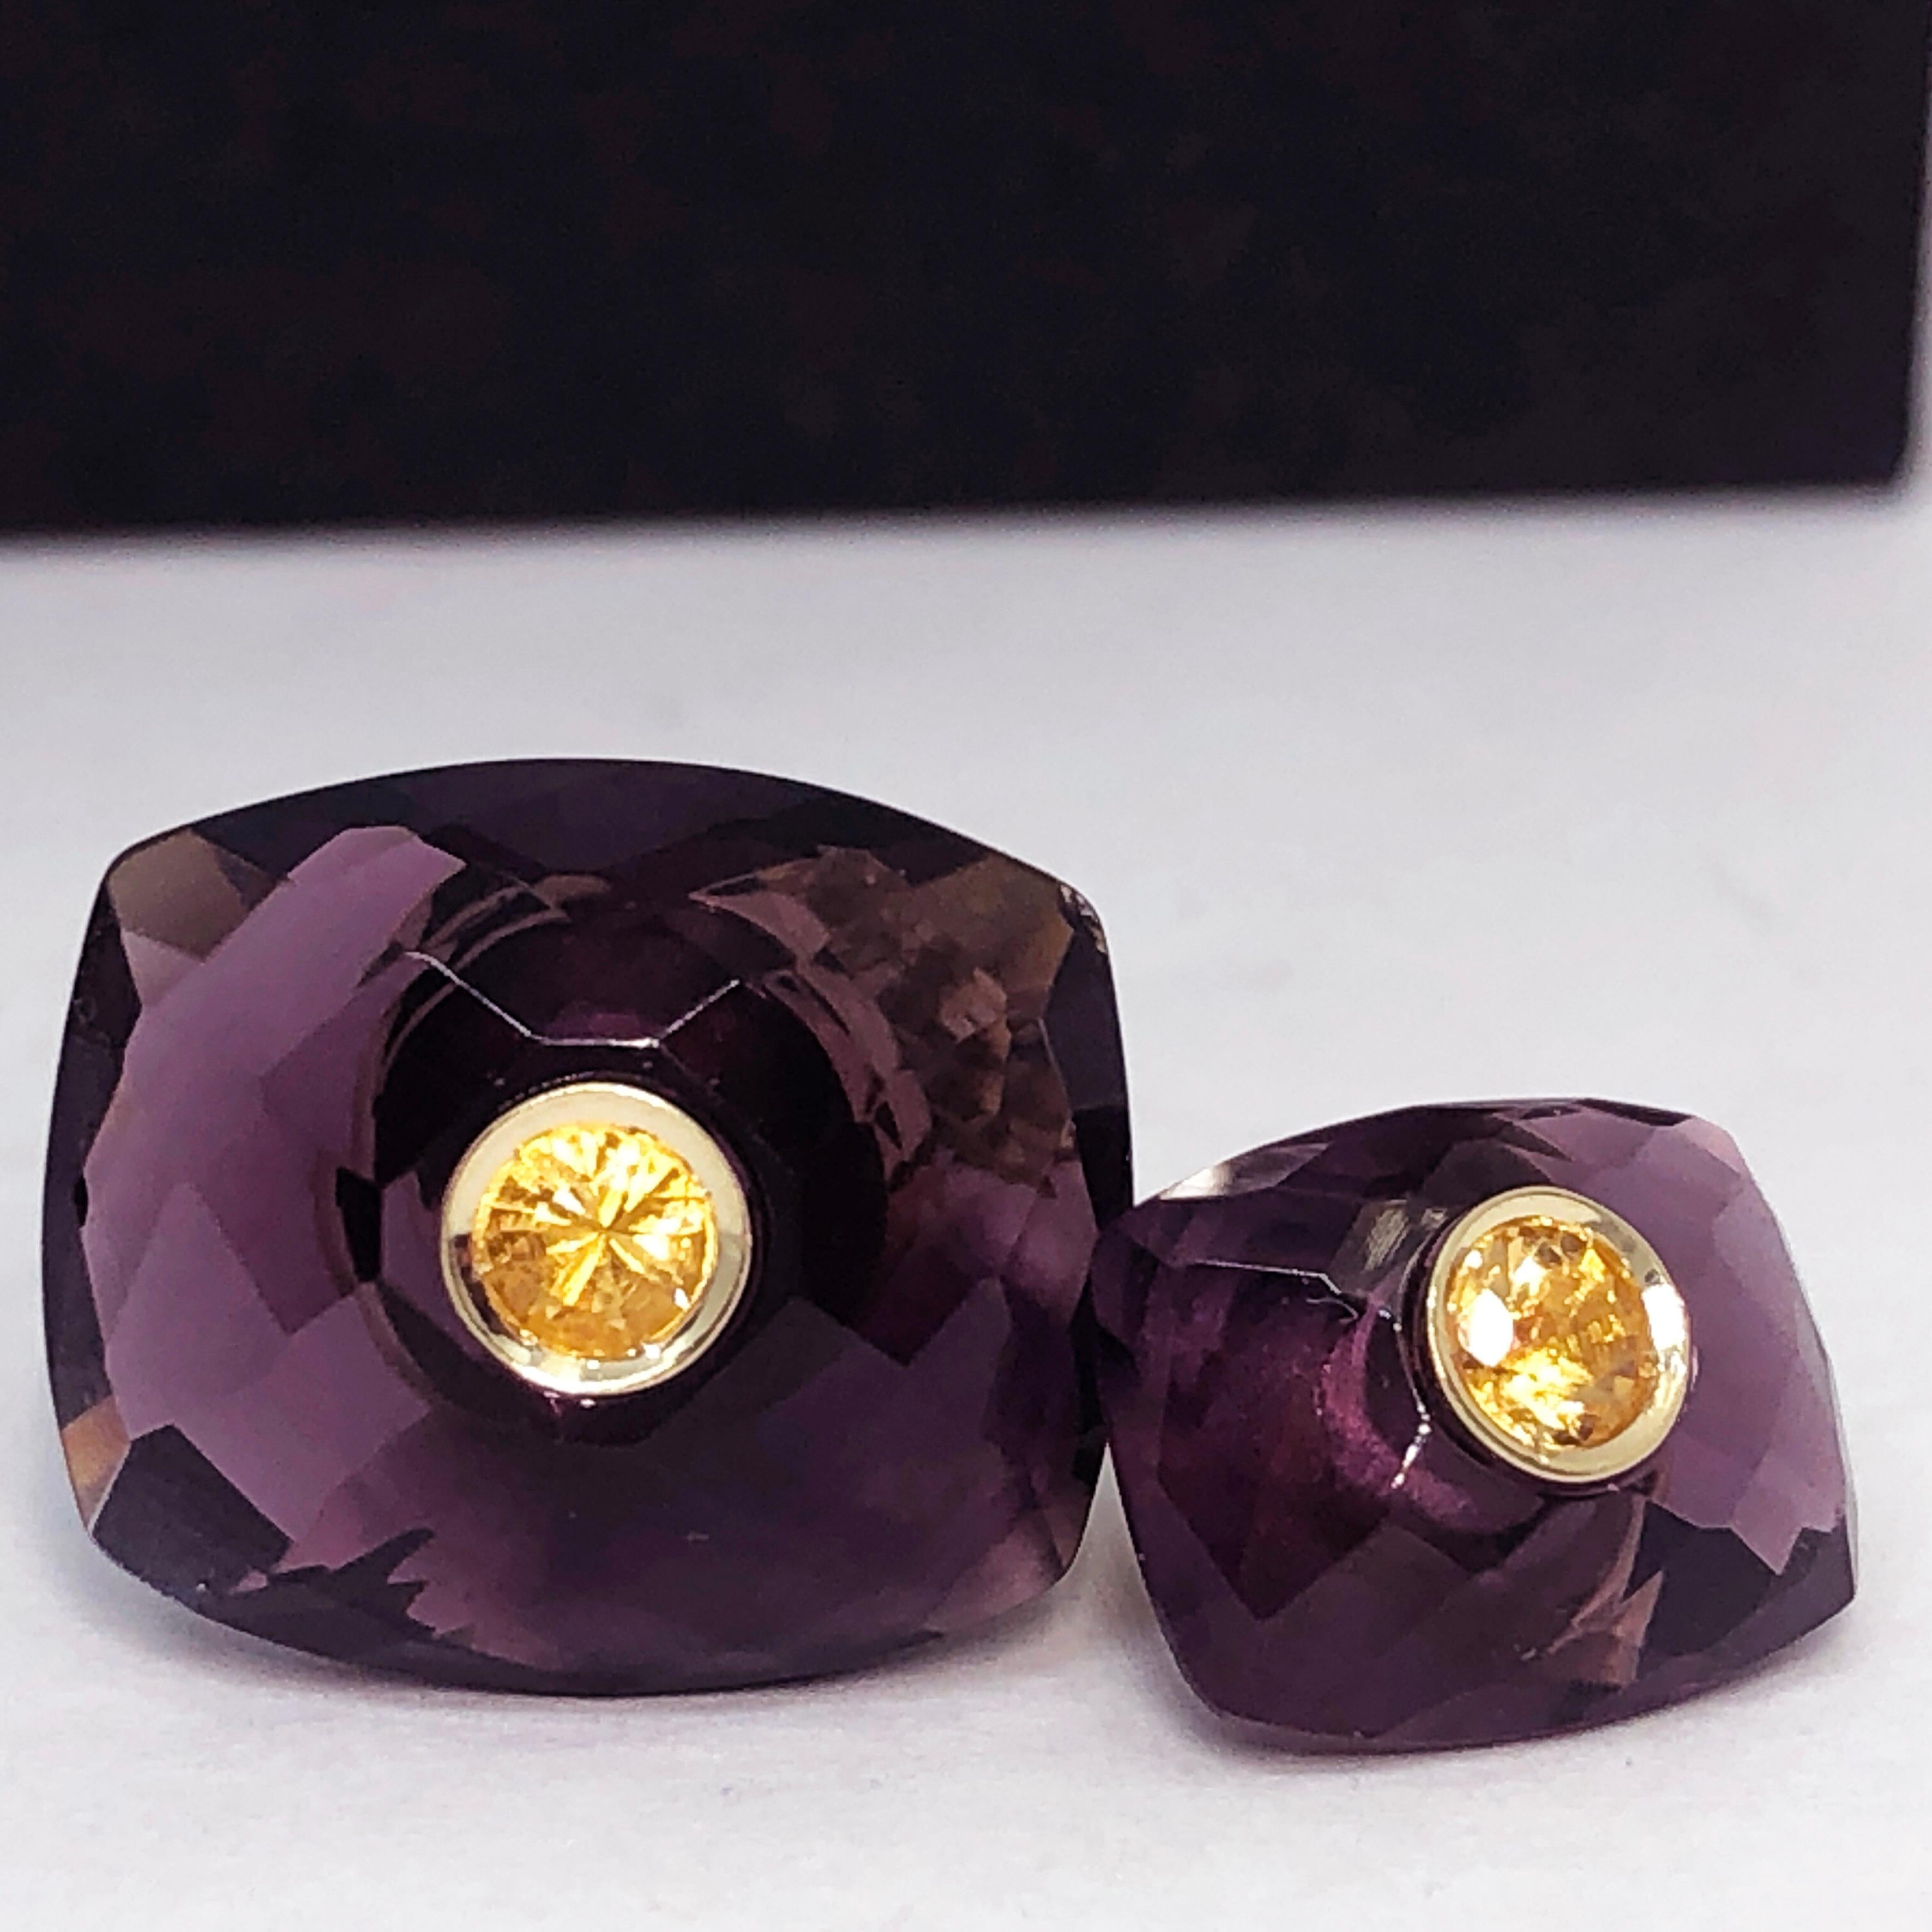 Unique yet Timeless 0.42 Carat Round Yellow Sapphire in a 21.00 Carat Hand Inlaid Double Faceted  Amethyst Yellow Gold Cufflinks.
In our smart fitted black box.
